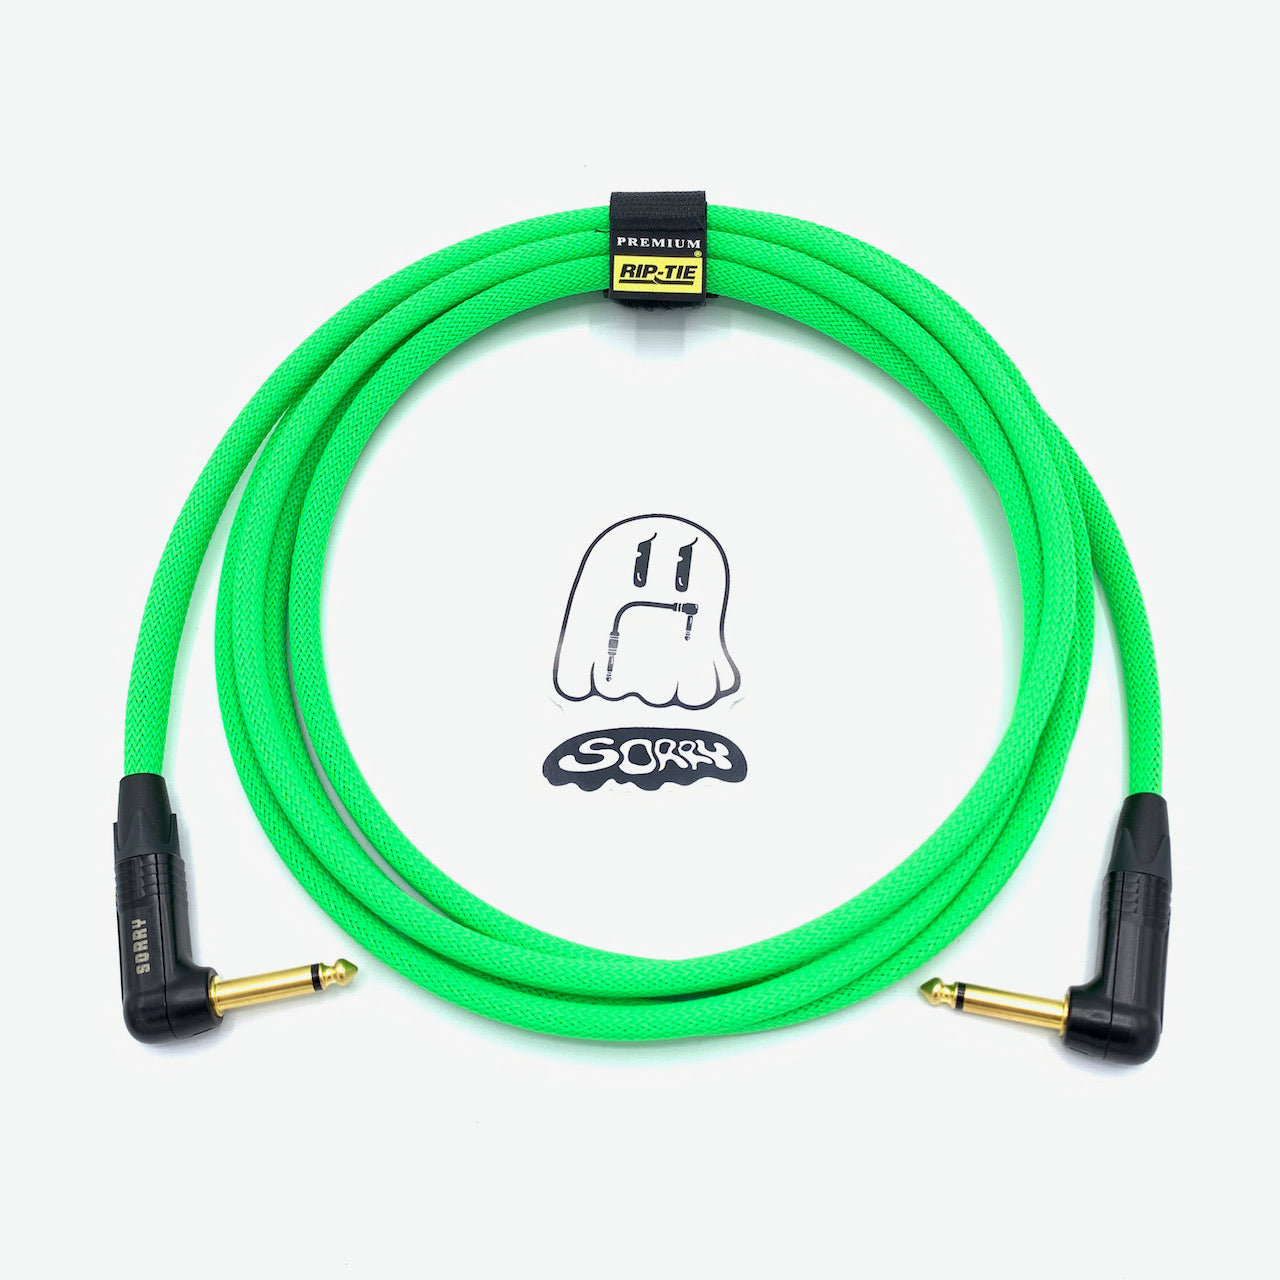 SORRY Right Angle to Right Angle Guitar / Instrument Cable - Neon Green